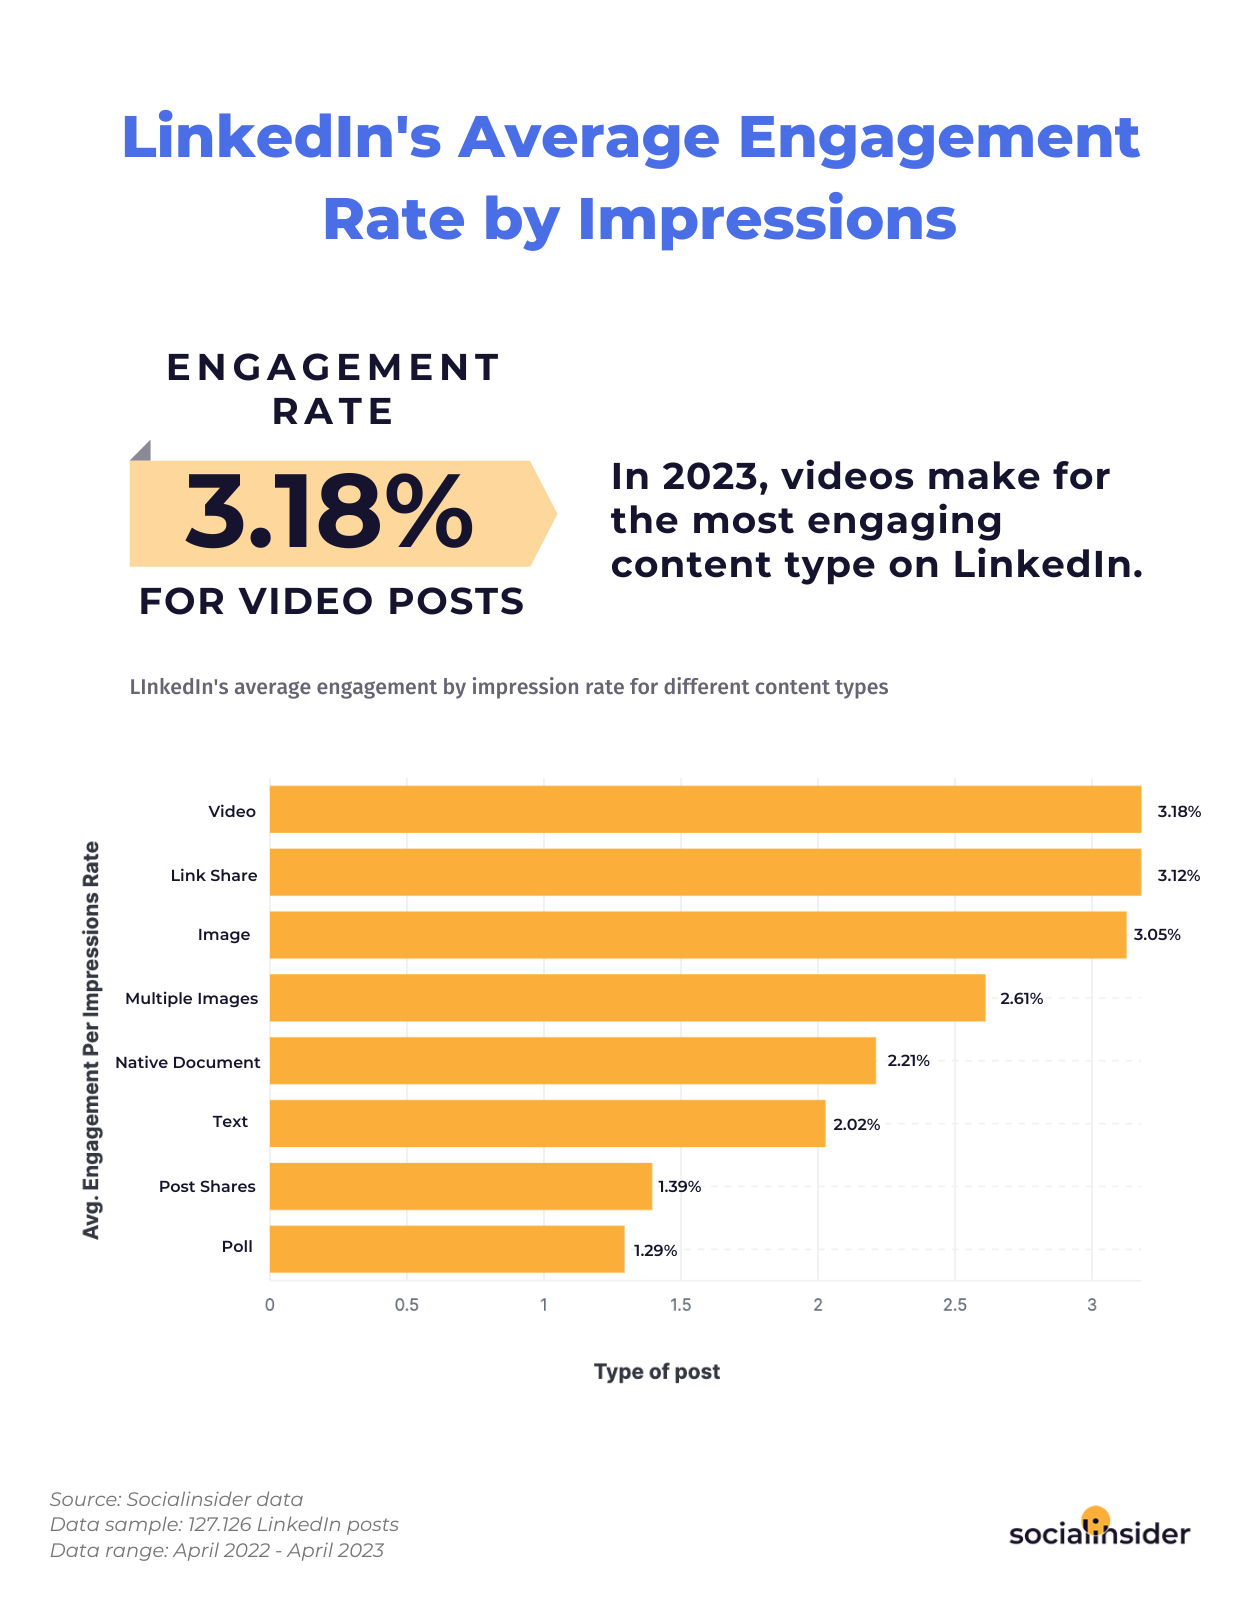 Here is a chart showing what's the average LinkedIn engagement rate for different content types in 2023. 